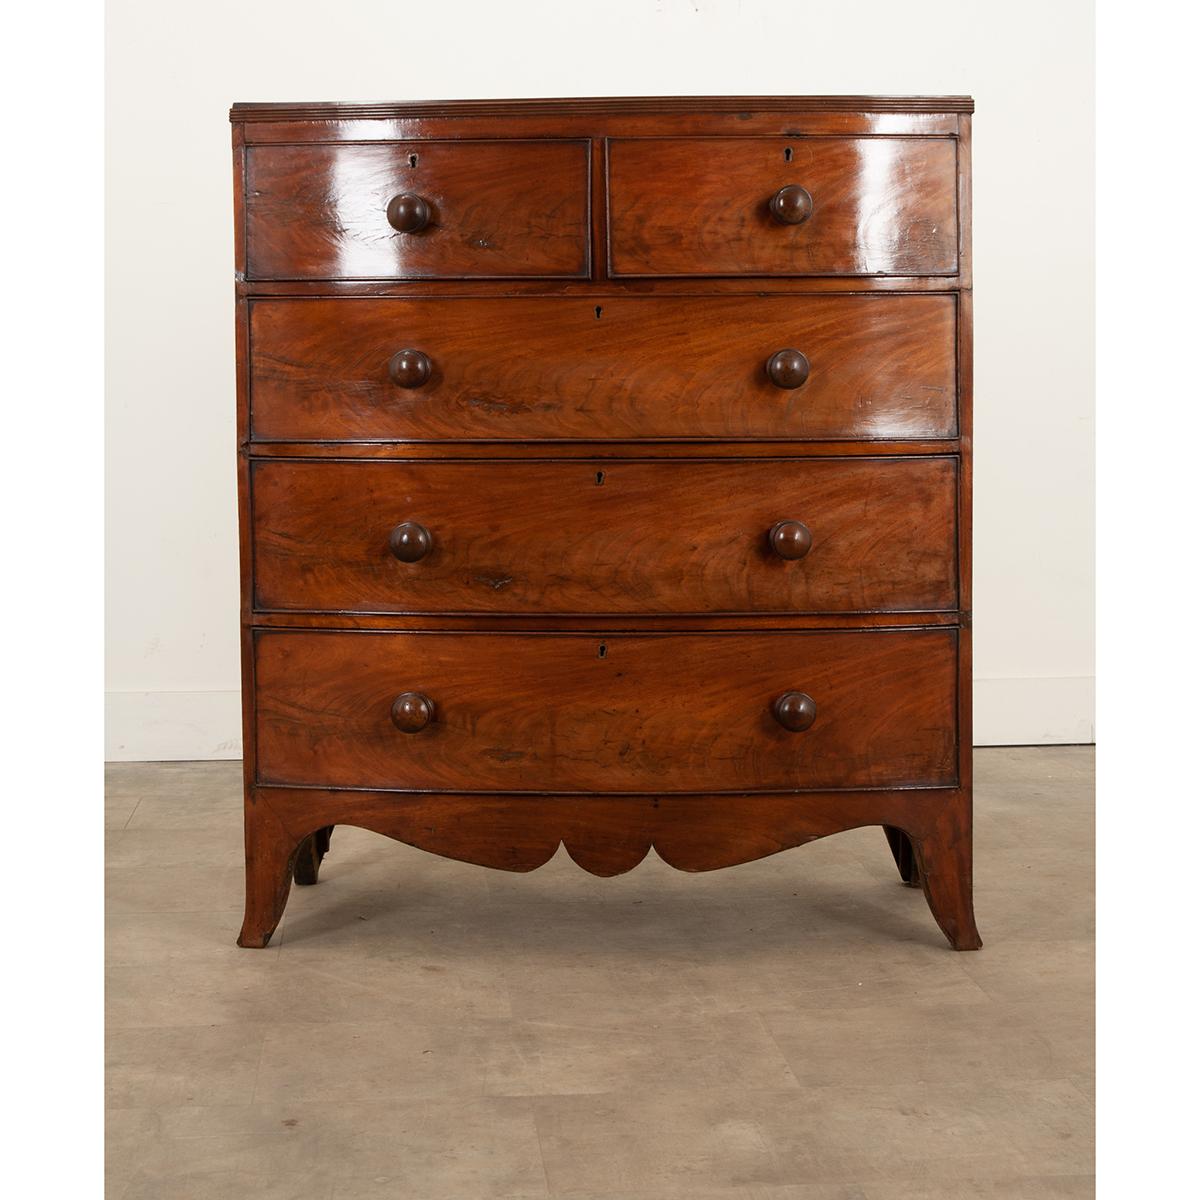 A gorgeous 19th century English mahogany chest of drawers with a bow front. It has a wonderful patina from years of loving care and use. The top sits over 5 drawers each fitted with simple brass escutcheon plates. No keys are present but smooth